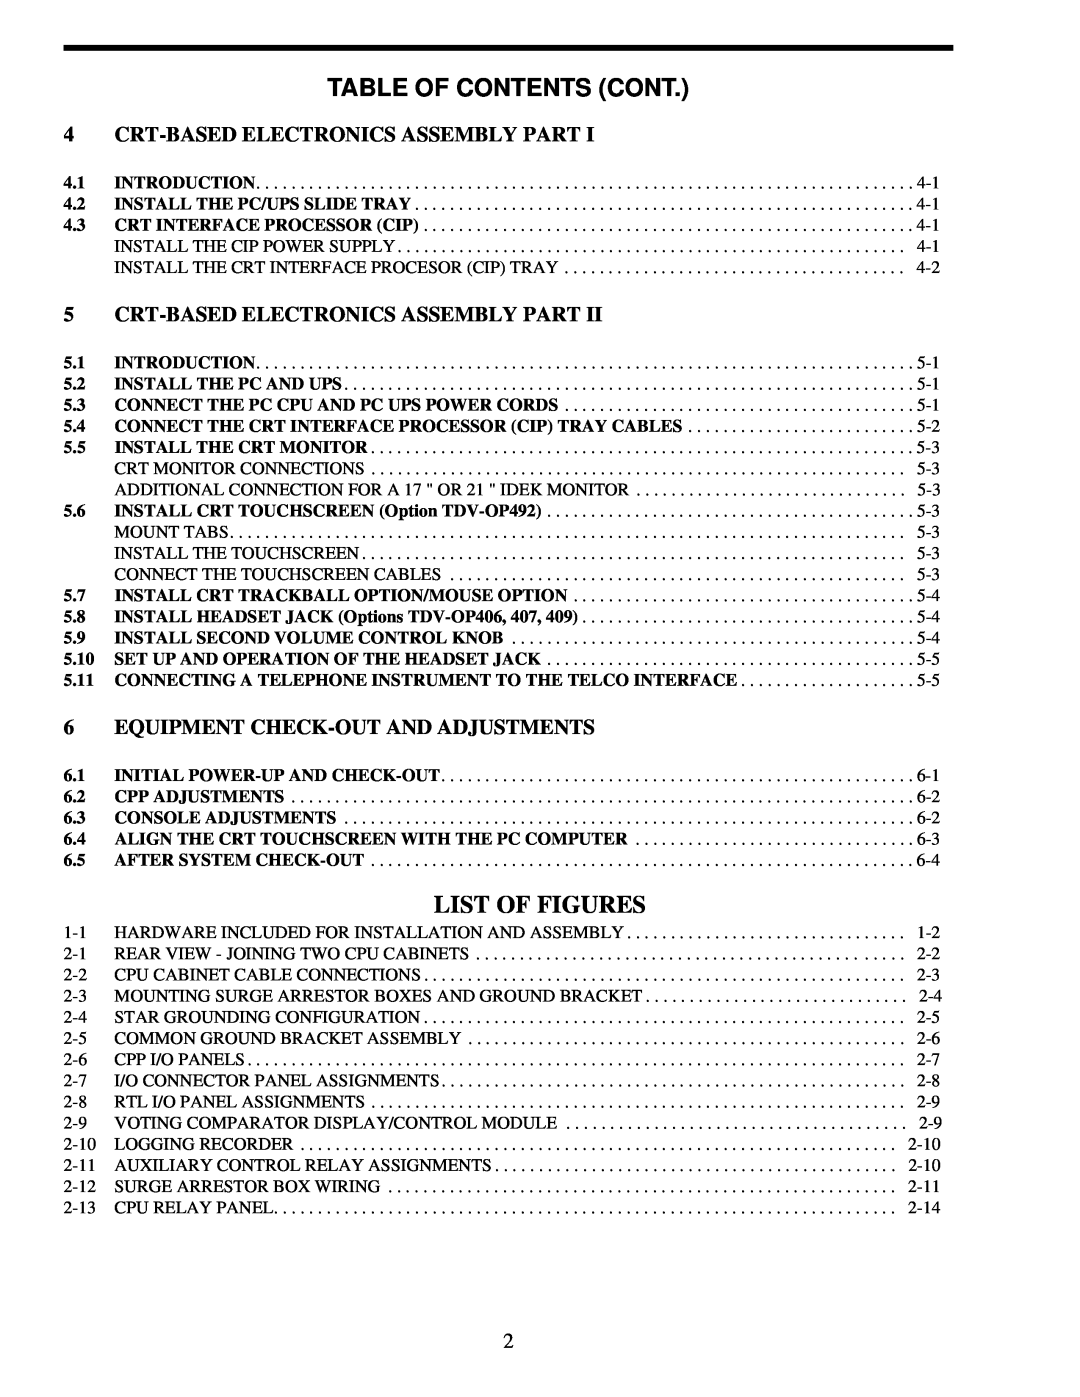 EFJohnson VR-CM50 manual Table Of Contents Cont, List Of Figures, Crt-Basedelectronics Assembly Part 